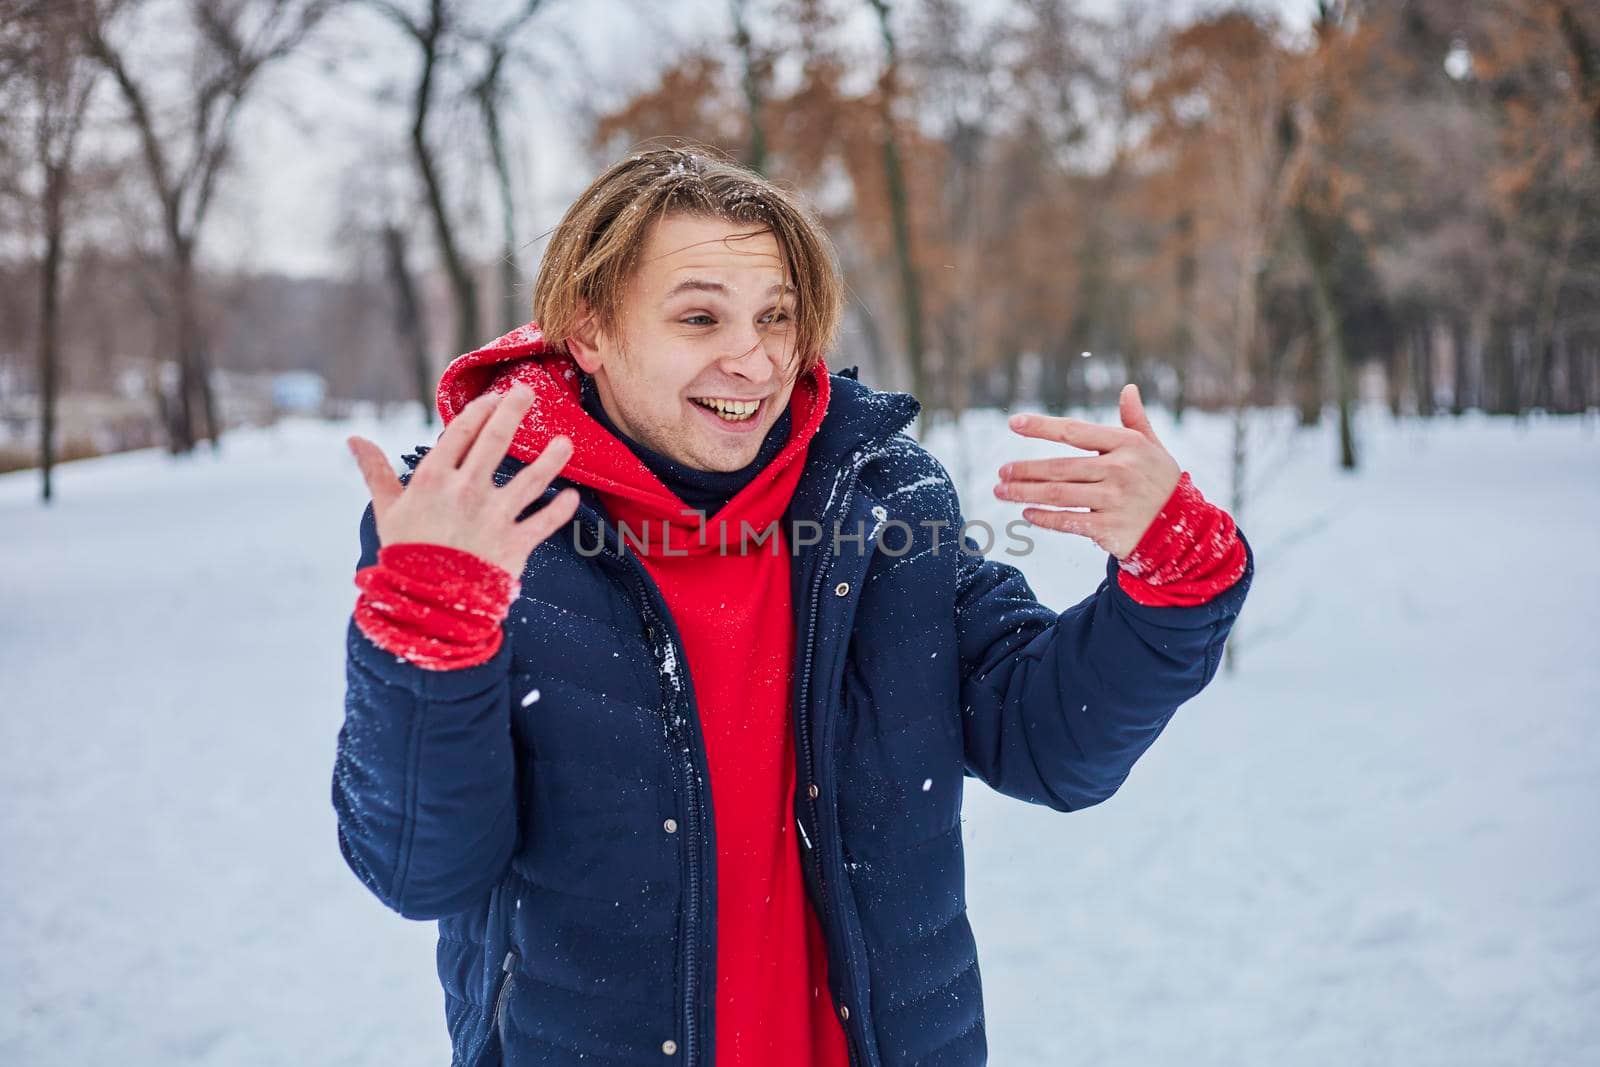 a young happy man is having fun in a winter park, throwing snow, it is cold in his hands, the emissions are off scale